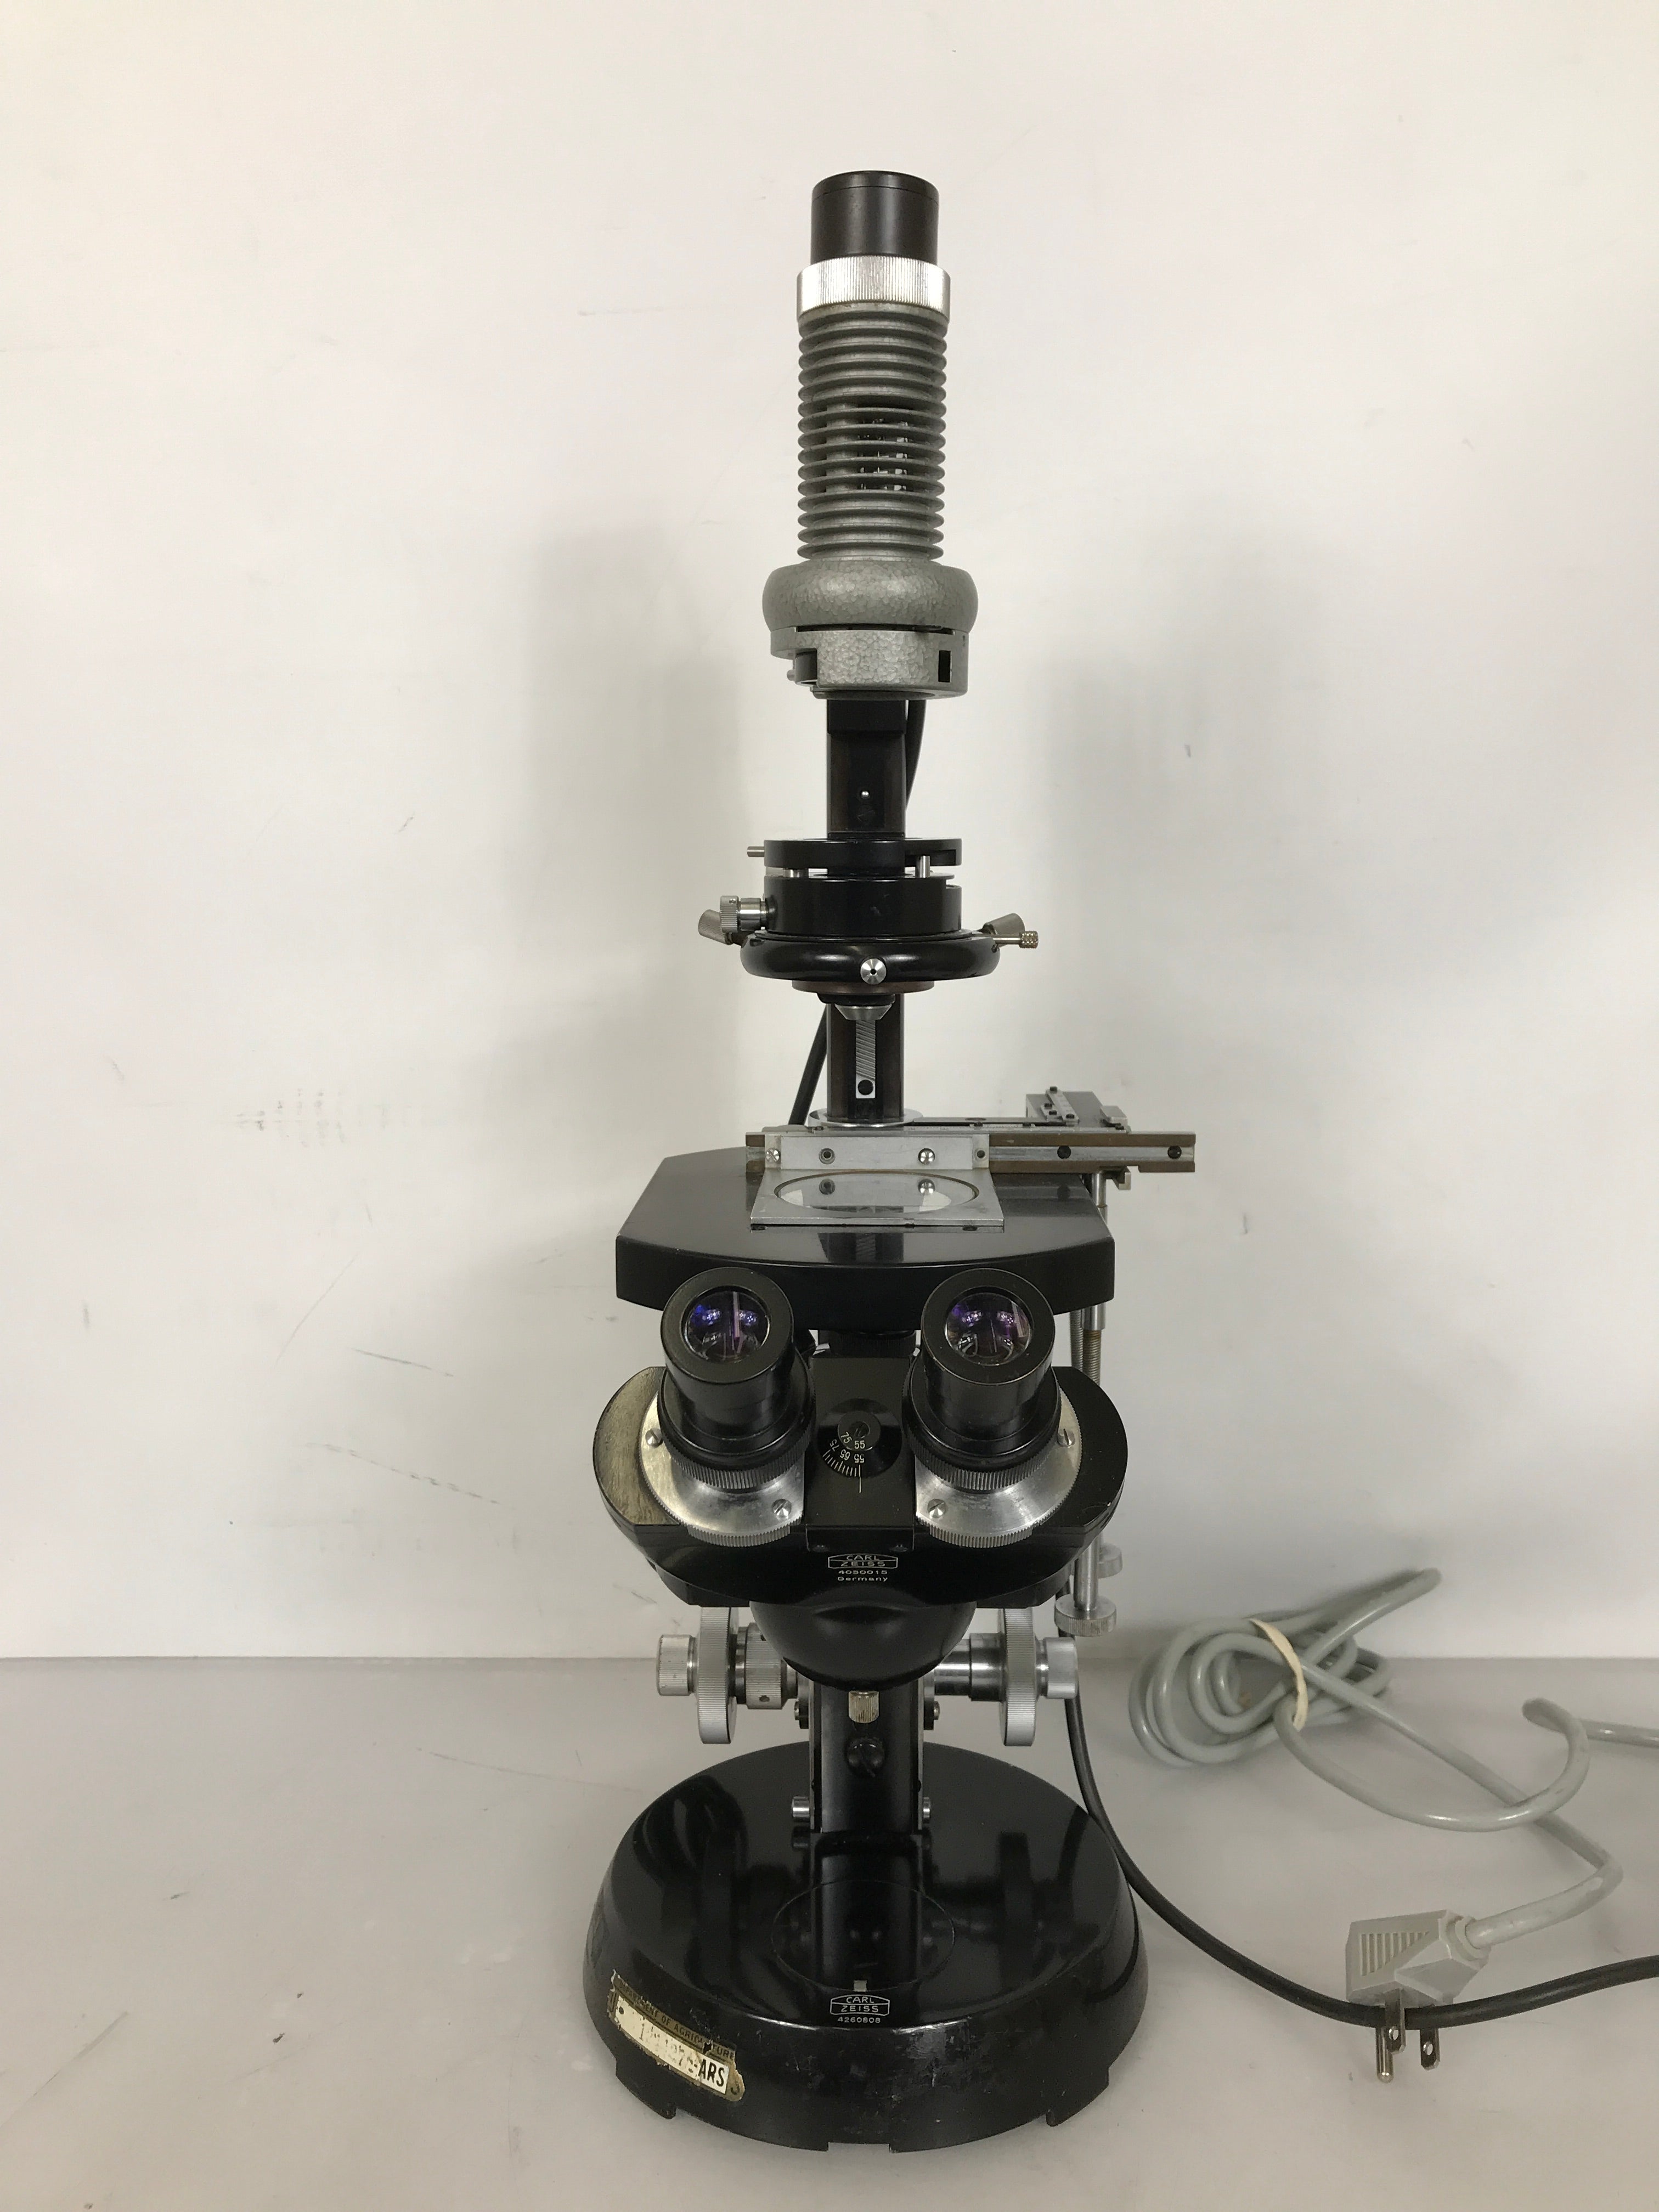 Carl Zeiss Inverted Binocular Microscope with Power Supply